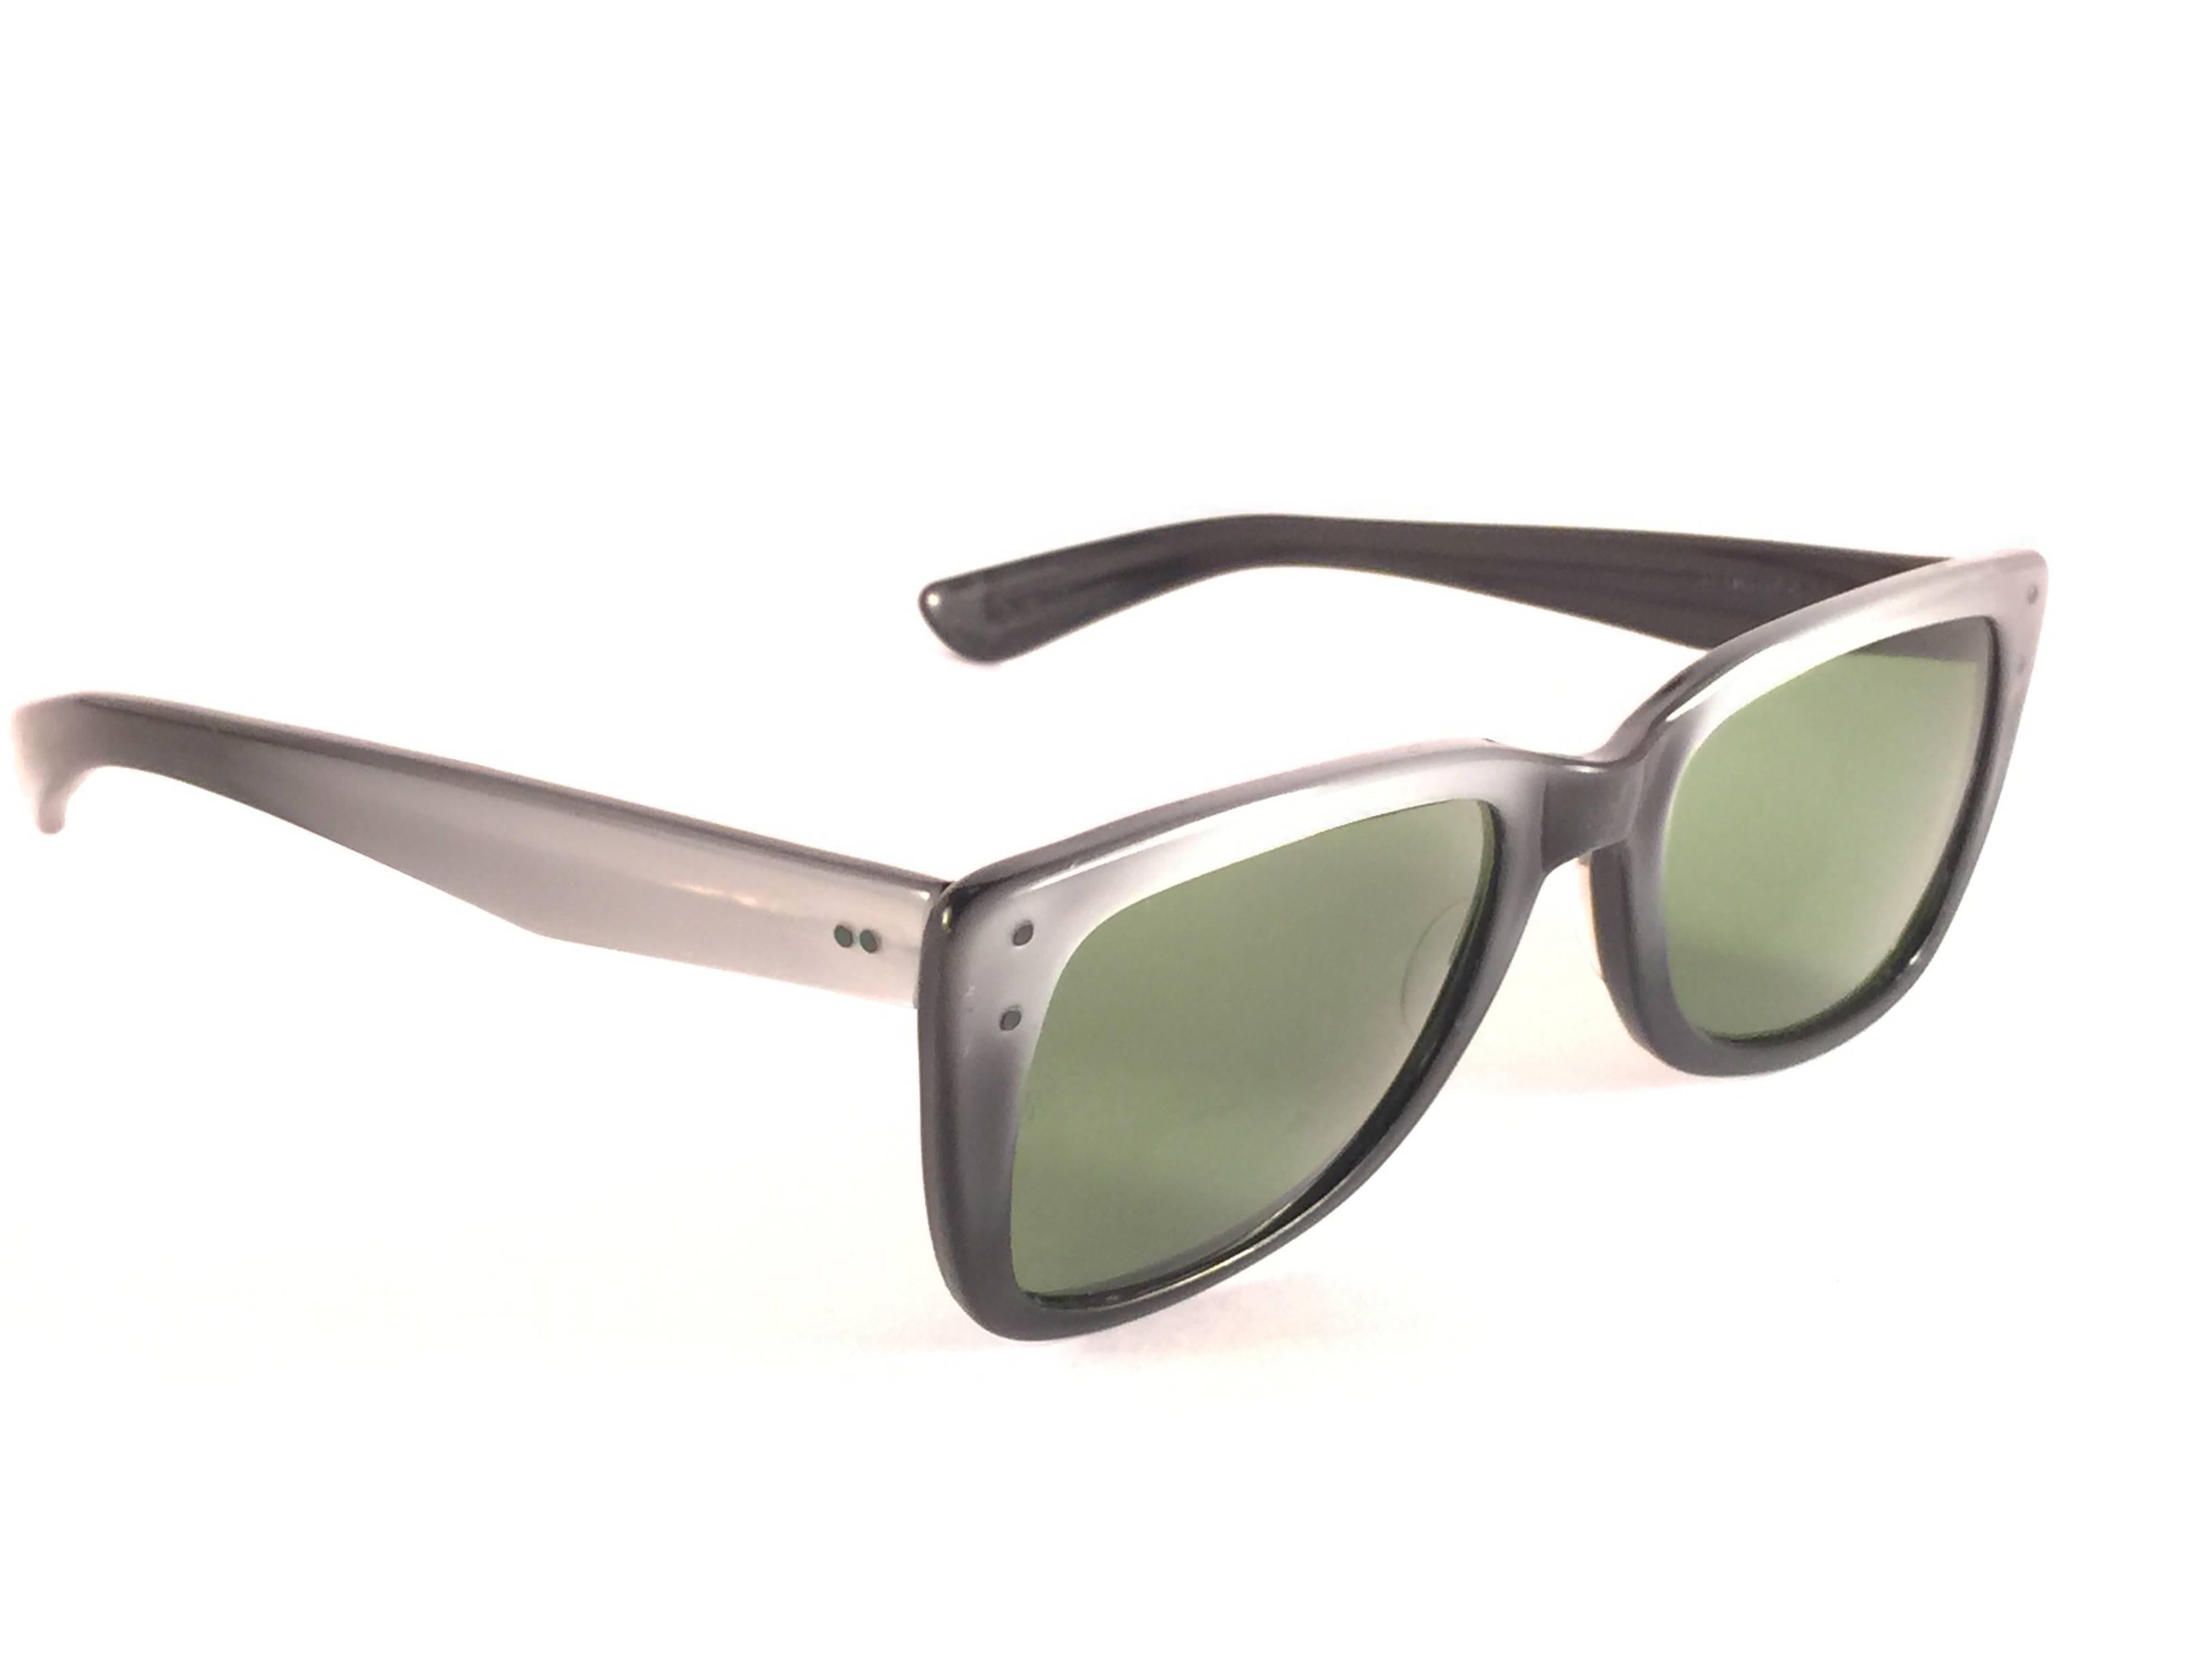 Super Rare 1960's Caribbean two tone metallic grey with thinner and elongated temples .  

Bausch and Lomb USA Made. G15 grey lenses. Straight out of the 1960's. 'All hallmarks. 
Minor sign of wear due to 60 years of storage. 
A Piece of sunglasses